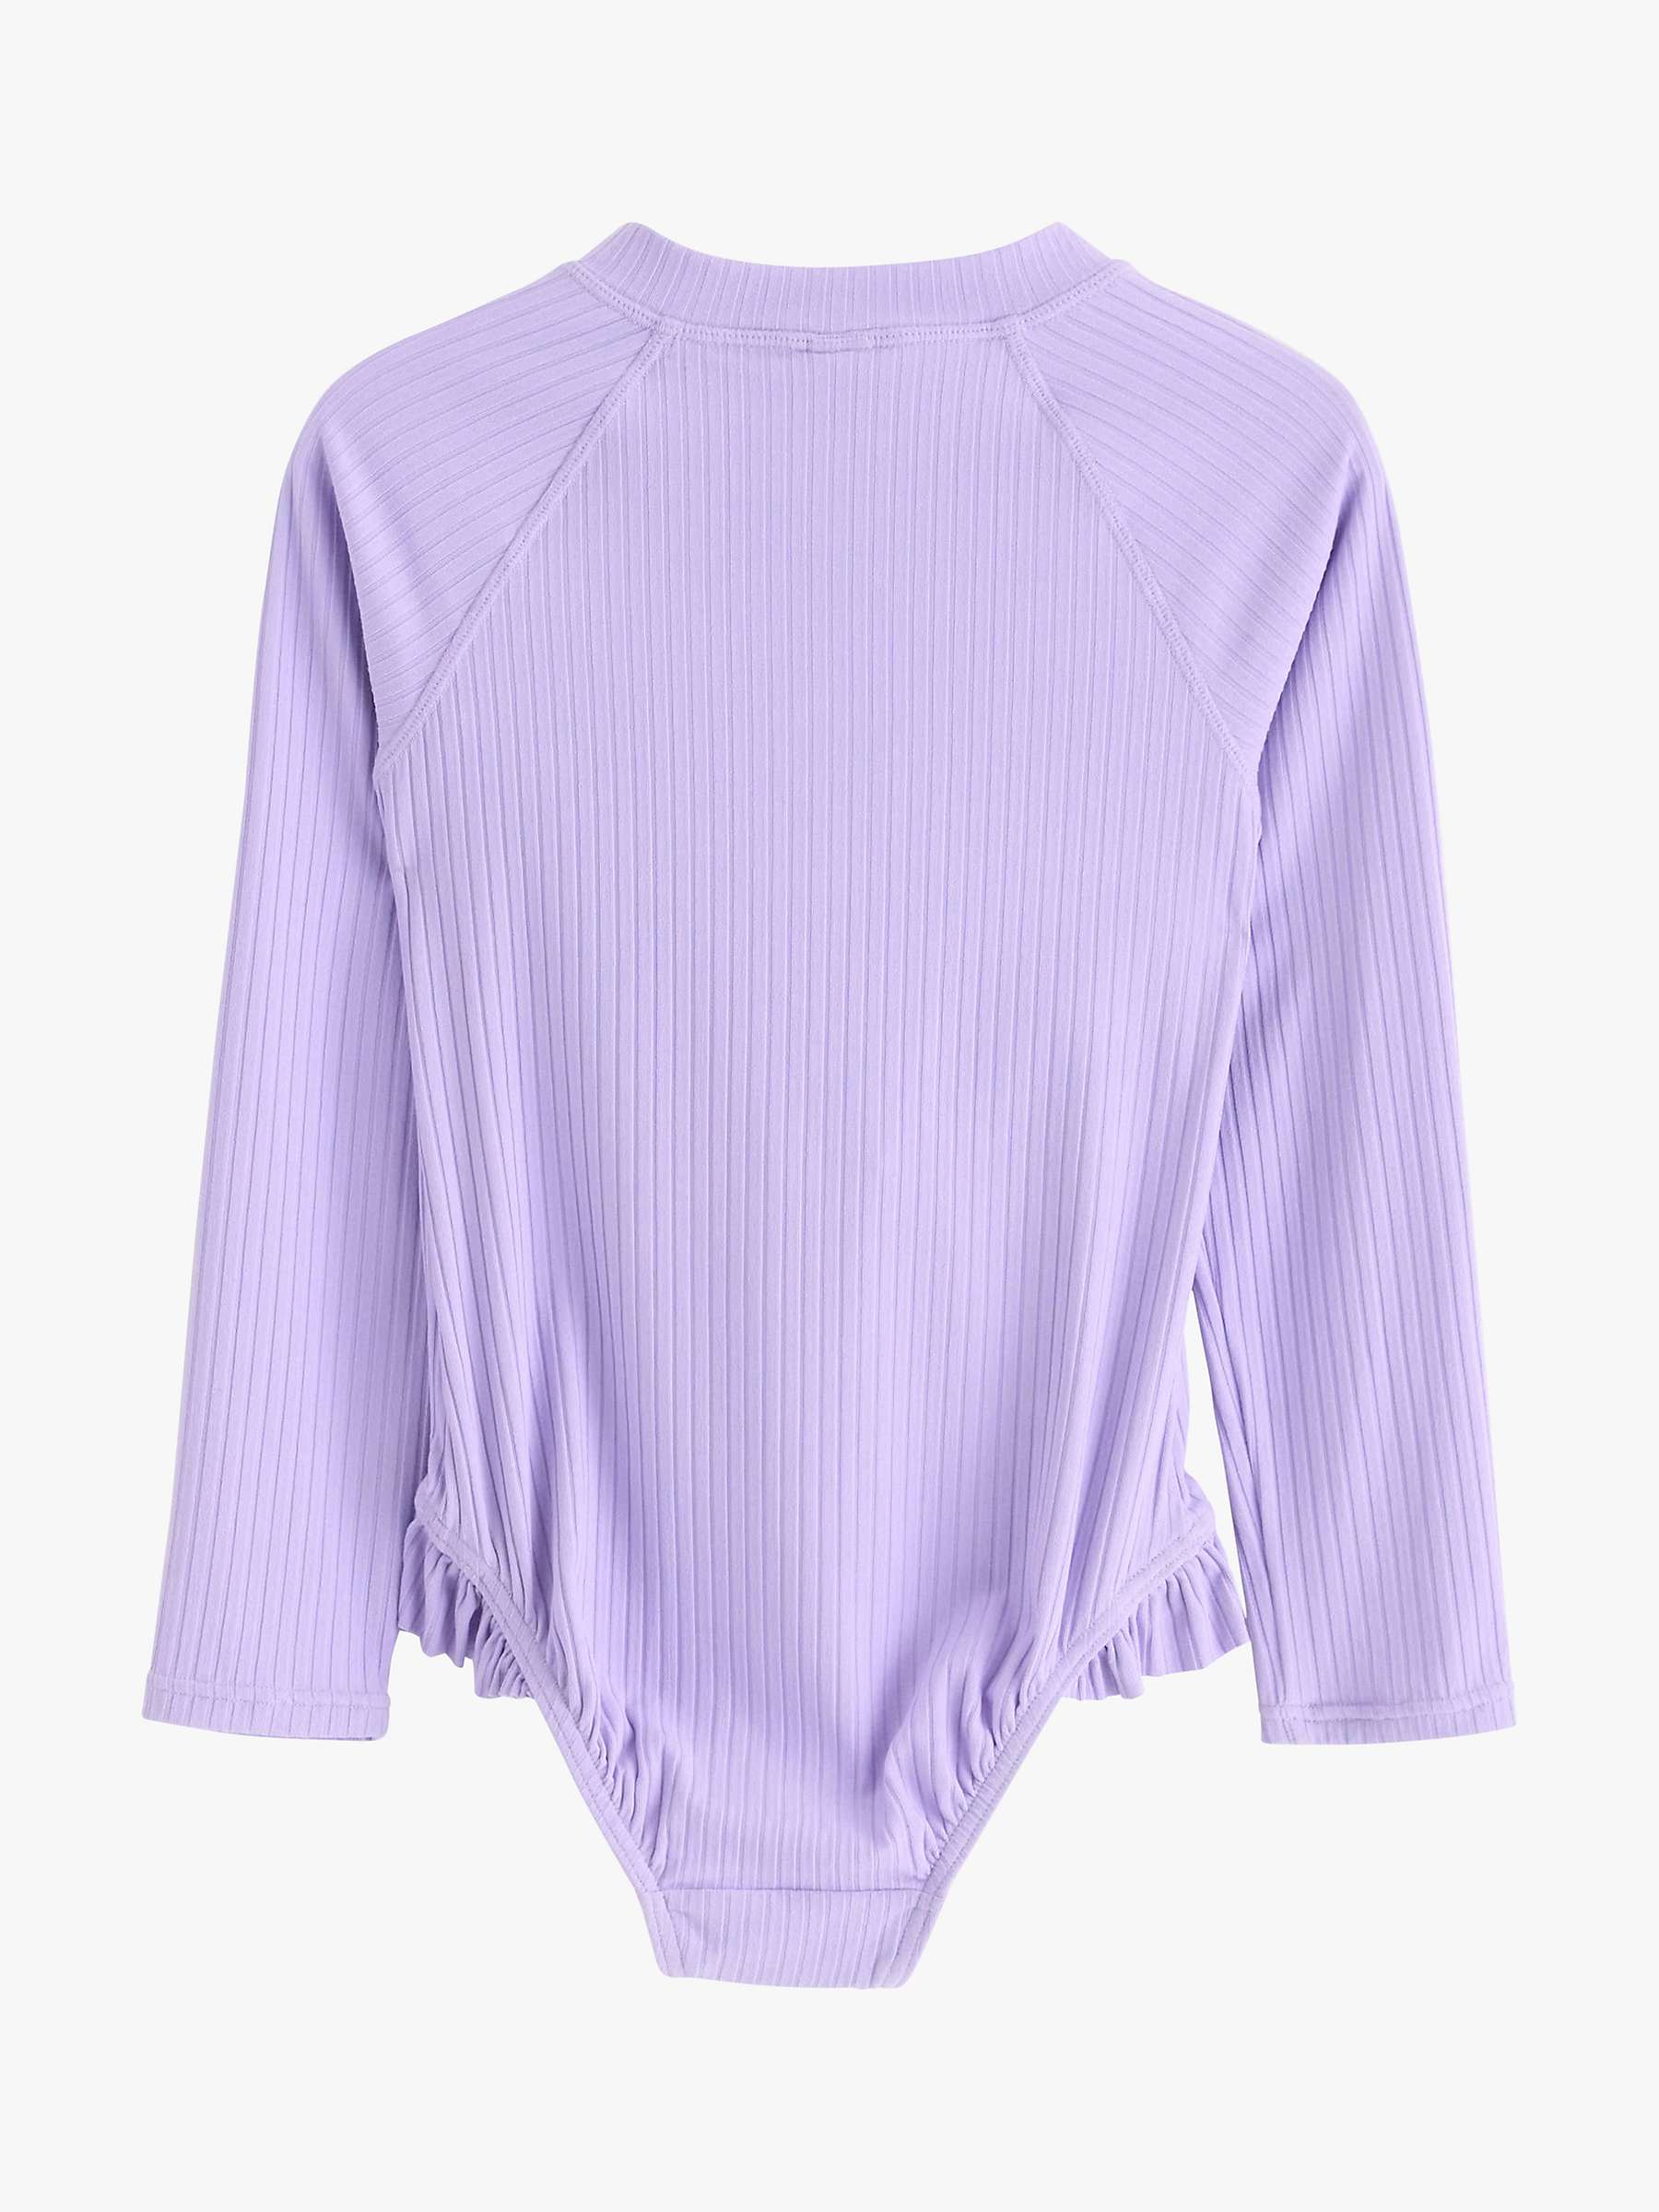 Buy Lindex Kids' UV 50+ Protection Rib Long Sleeve Swimsuit, Light Lilac Online at johnlewis.com